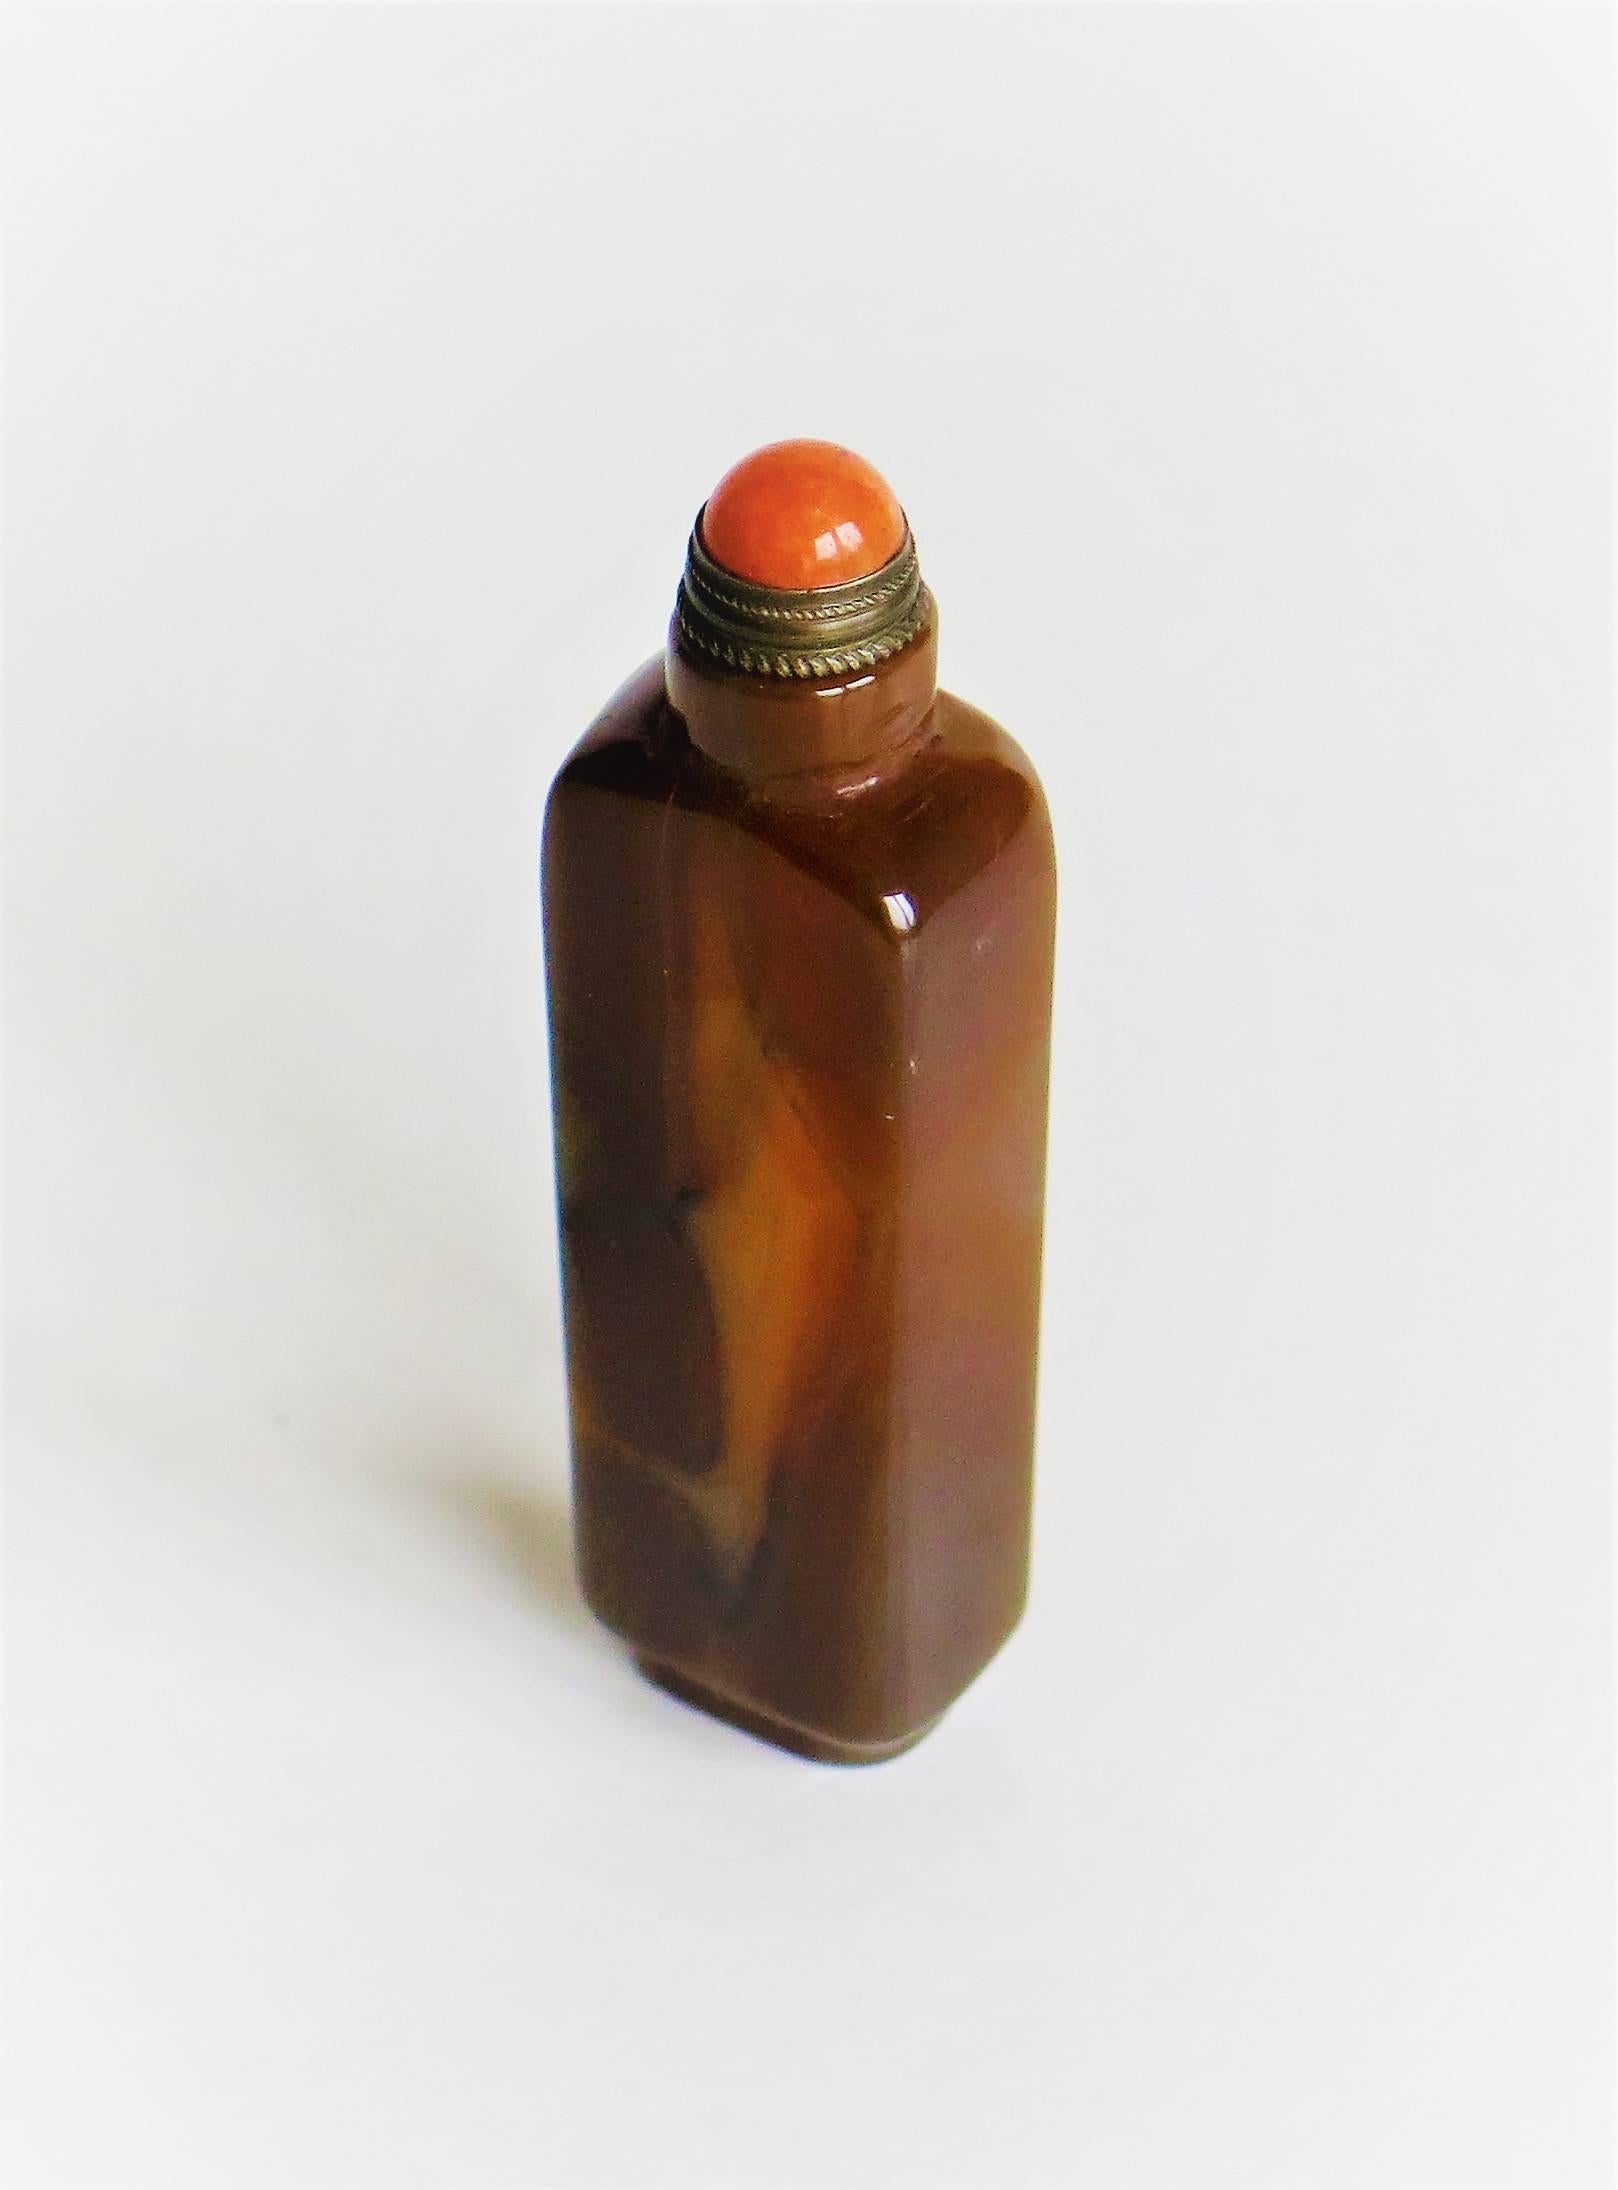 Carved Chinese Snuff Bottle, Natural Jade, Orange Stone Stopper and Spoon, circa 1930